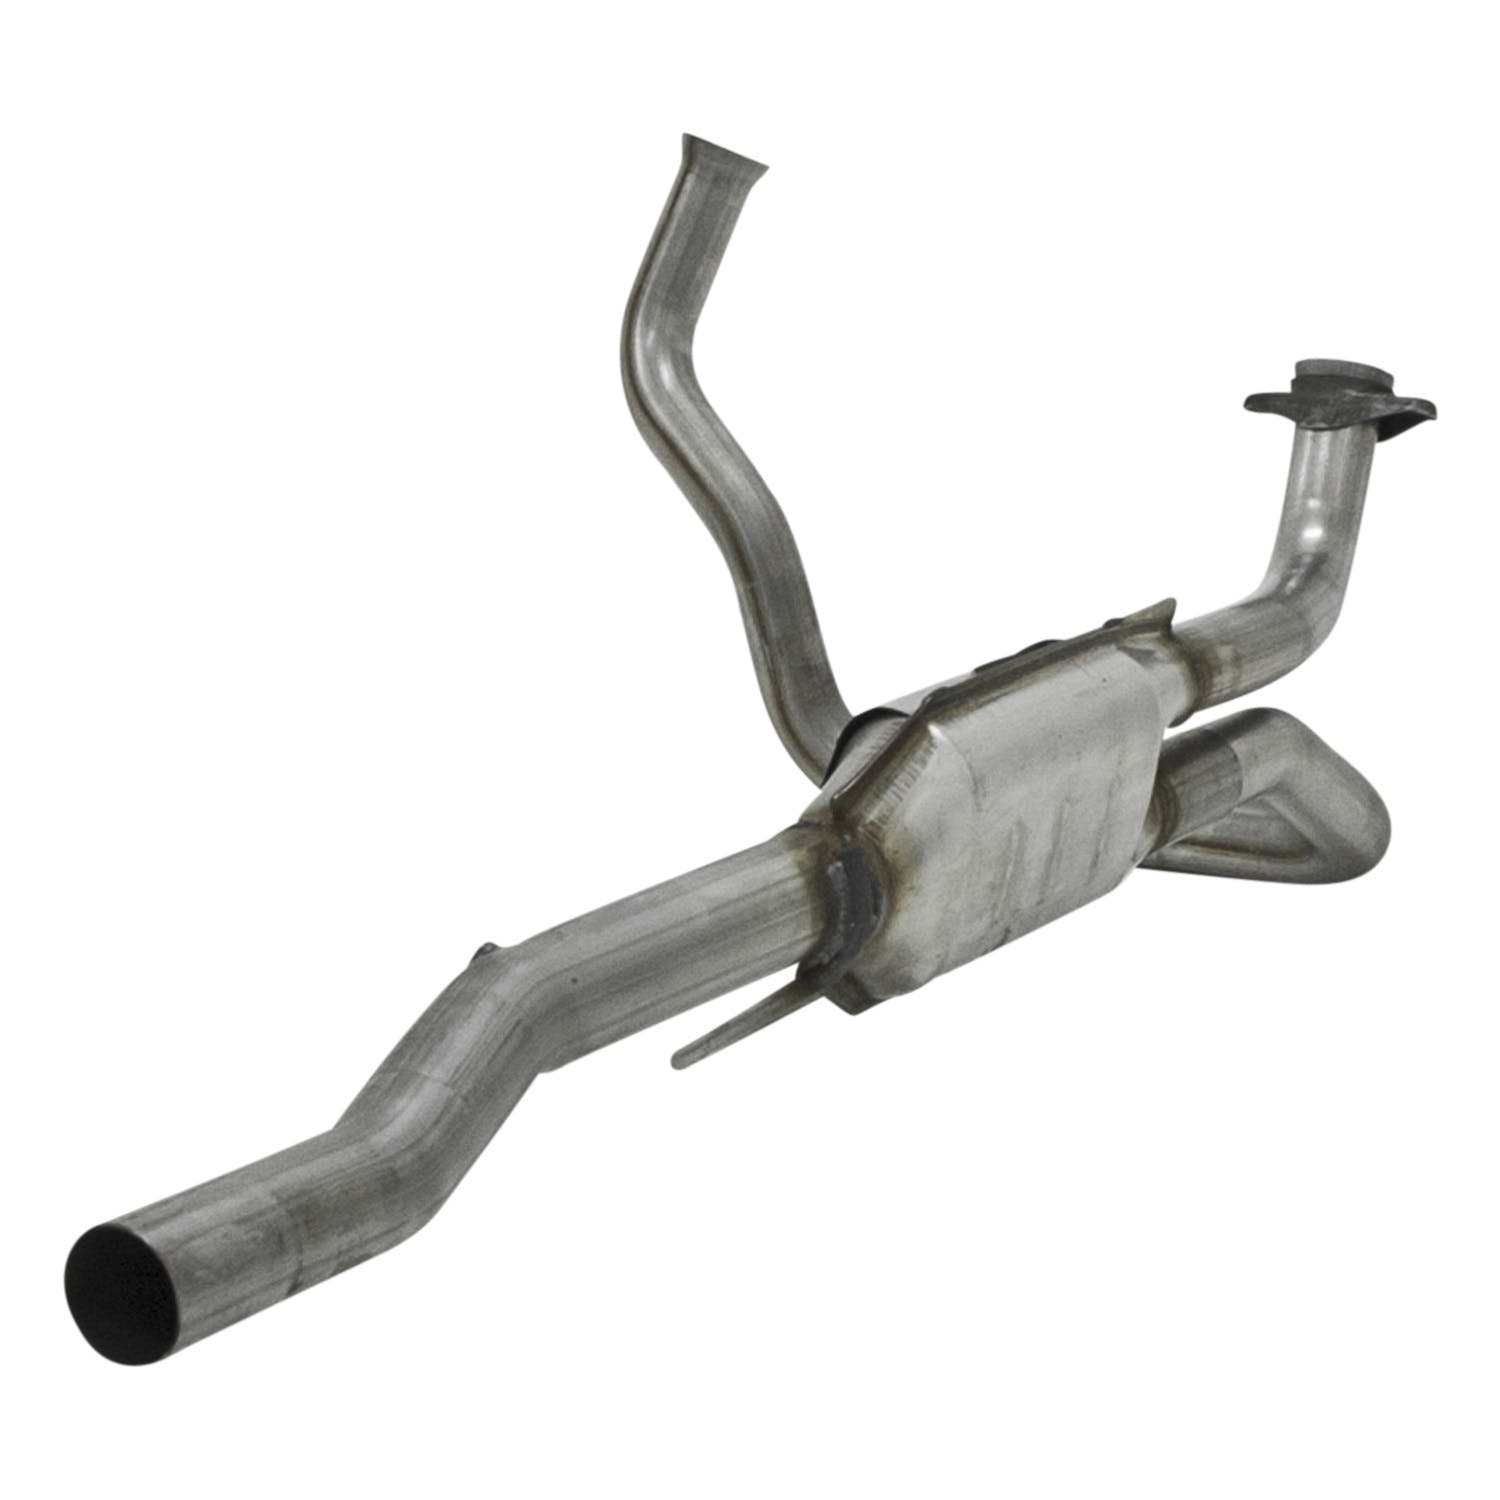 Flowmaster Catalytic Converters 2030005 Catalytic Converter-Direct Fit-2.00 in Inlet 2.50 in. Outlet-49 State